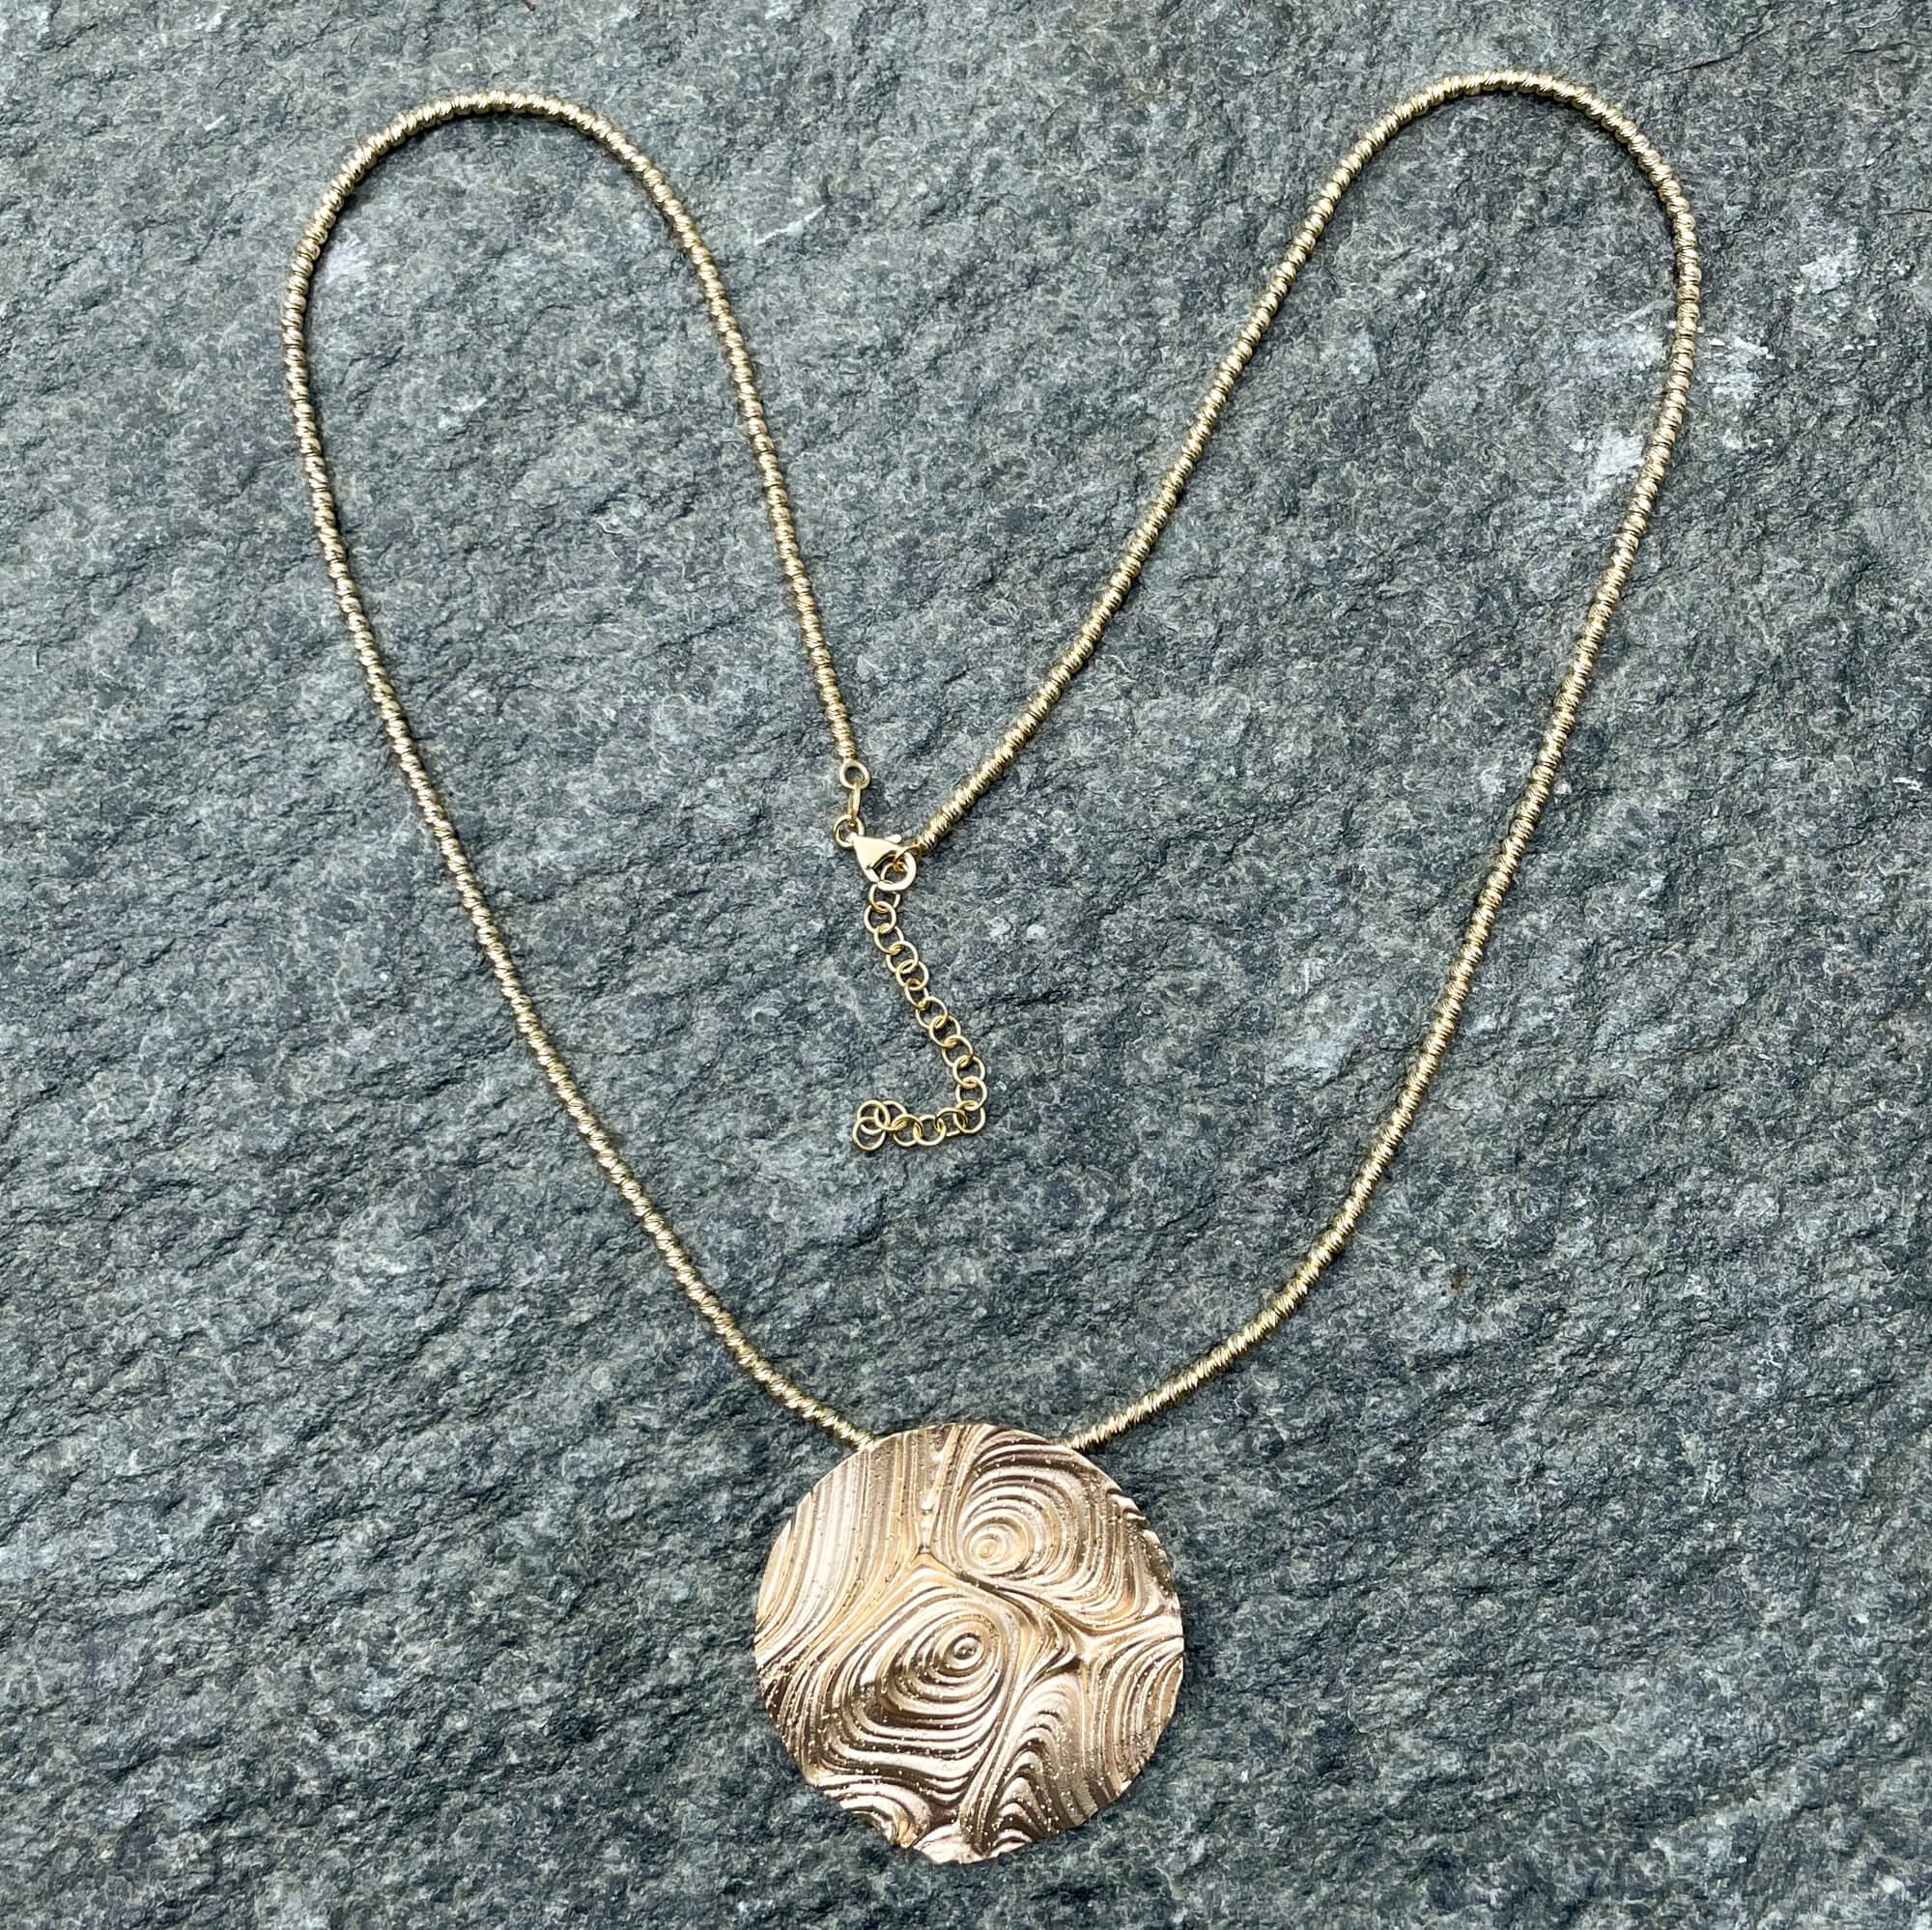 Decorated round pendant made of gold-plated silver